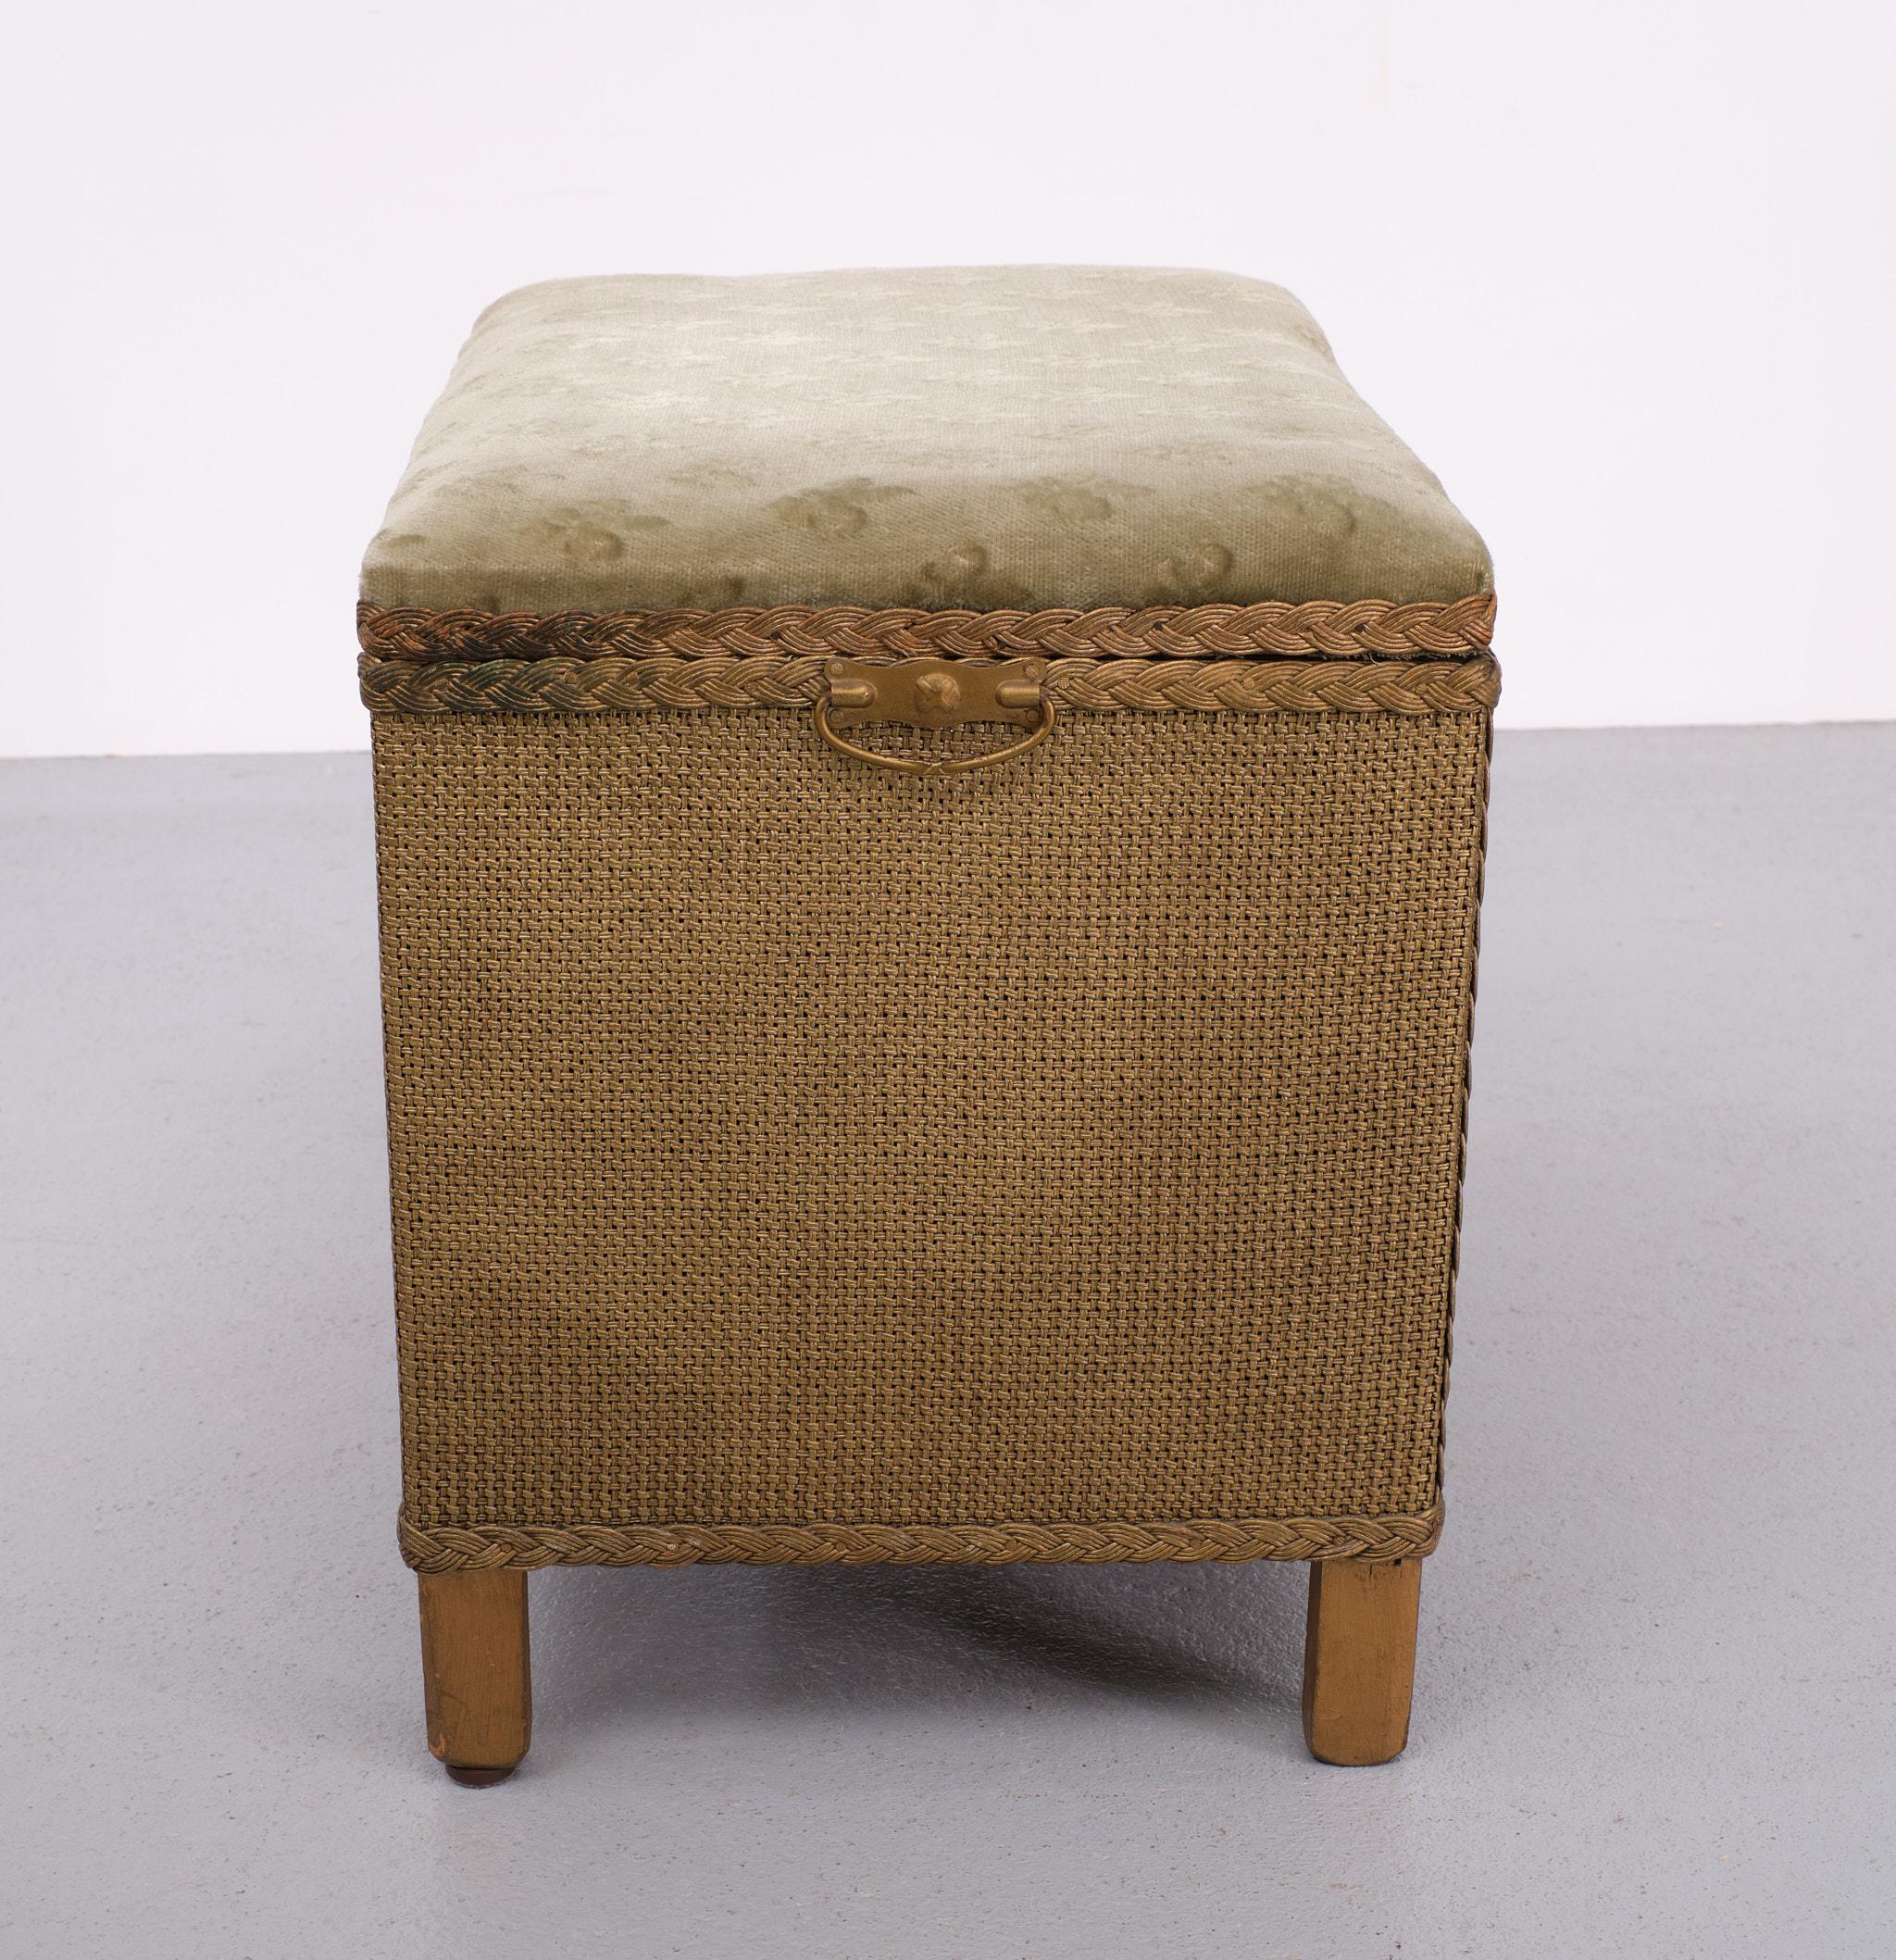 Wicker Lloyd Loom storage or seating Chest  1940s England  For Sale